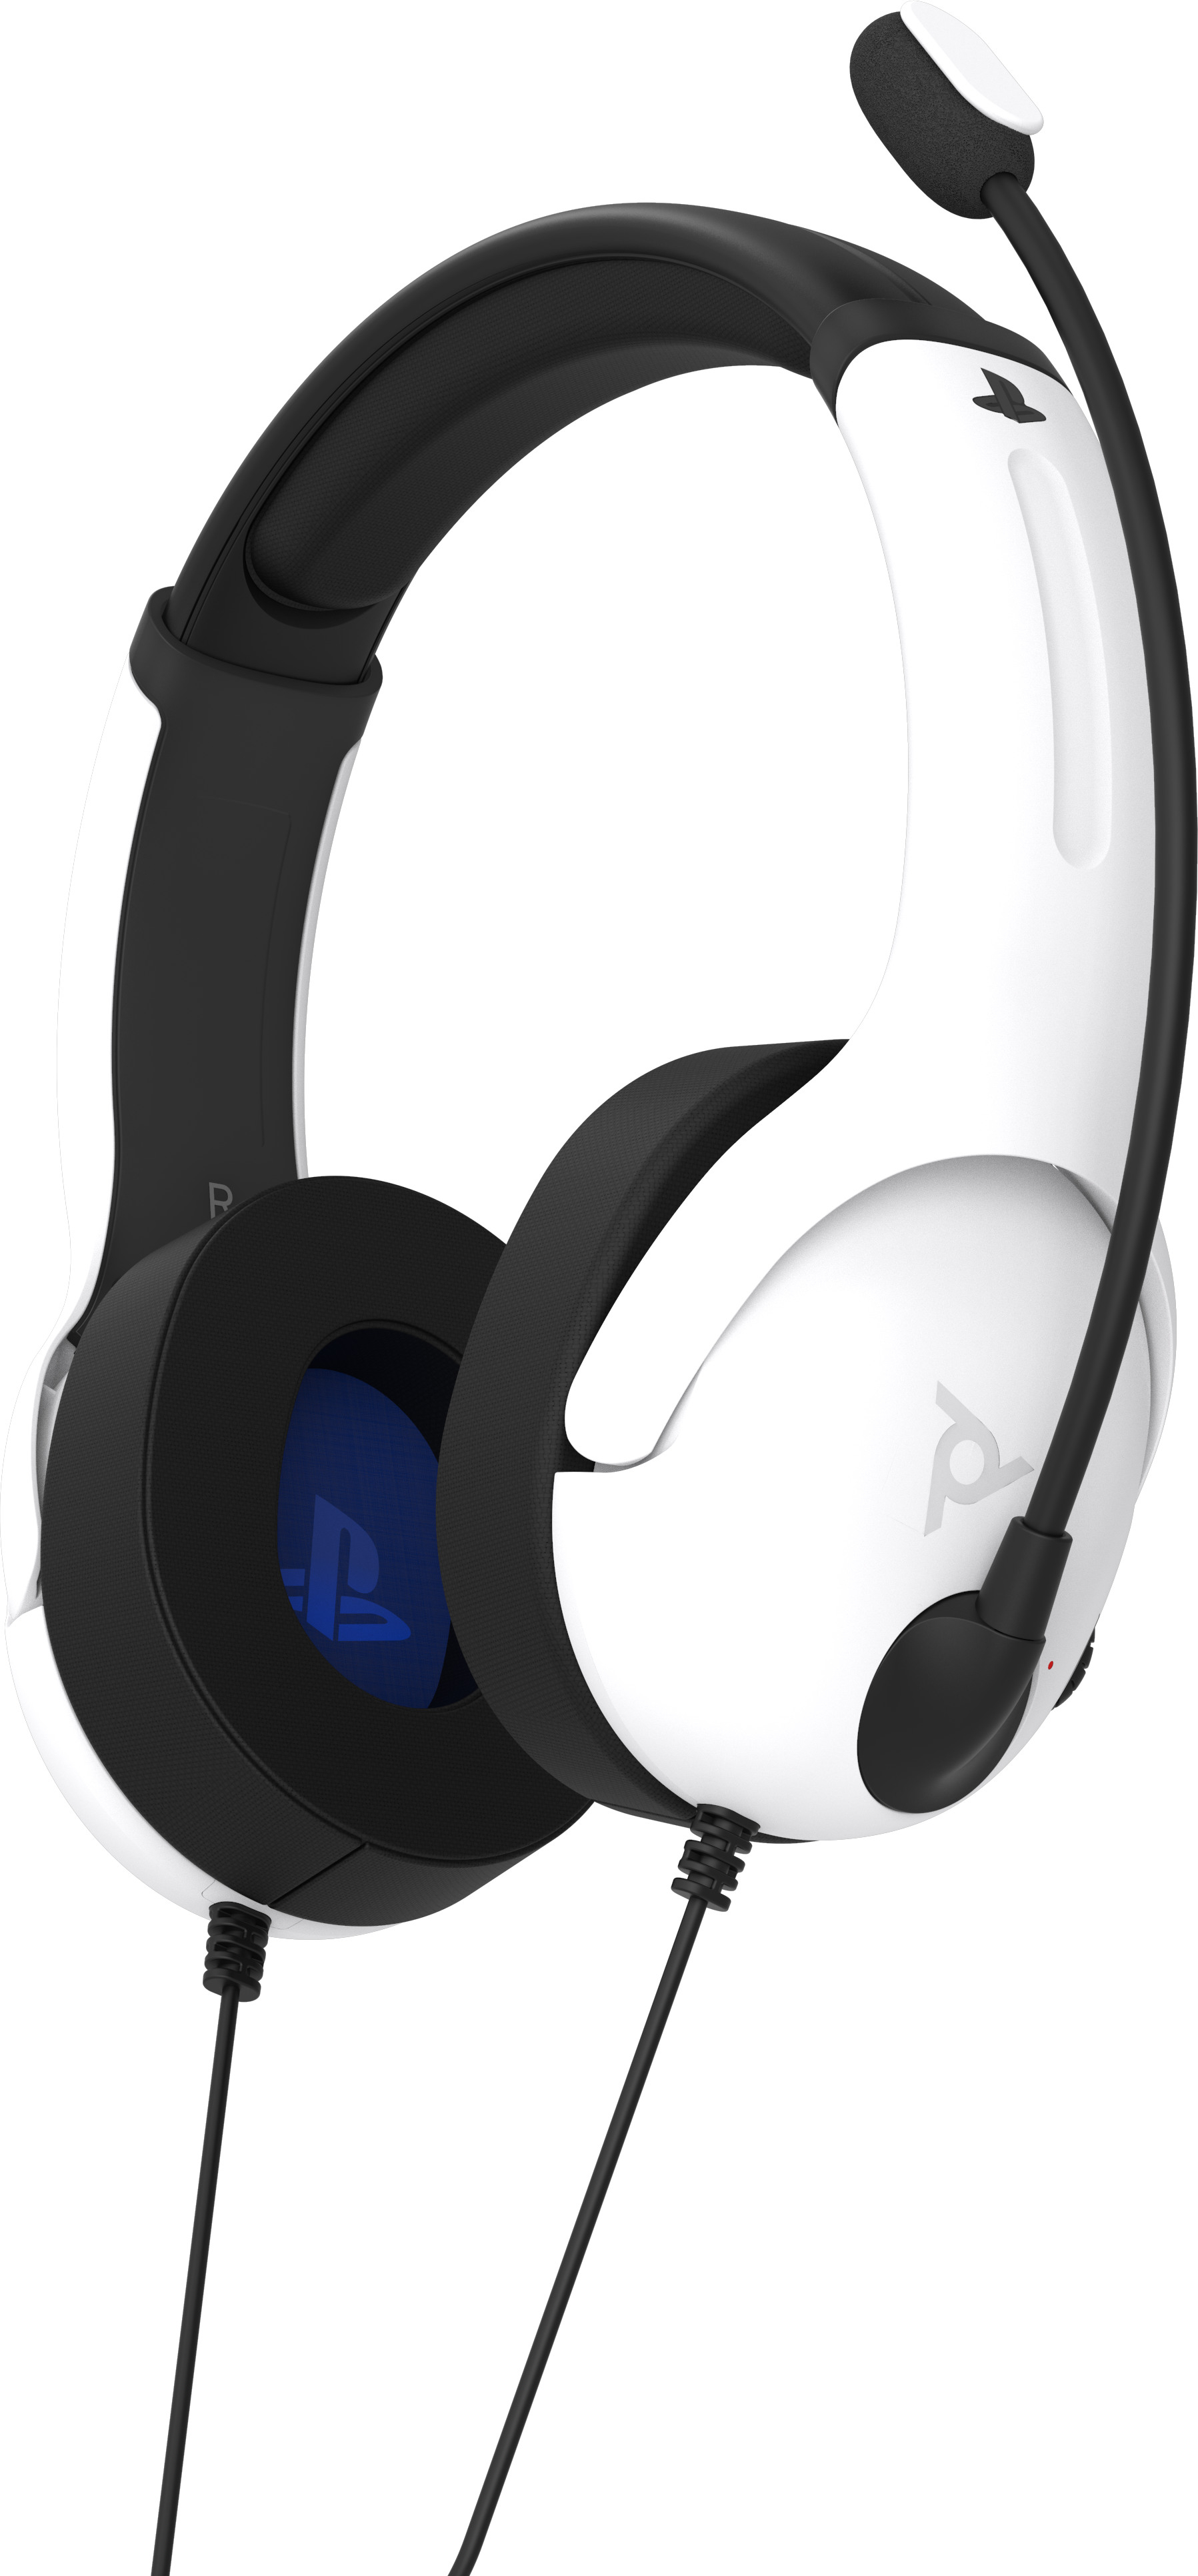 PDP LVL40 Wired Headset 051-108-EU-WH white, for PS4/PS5-EU